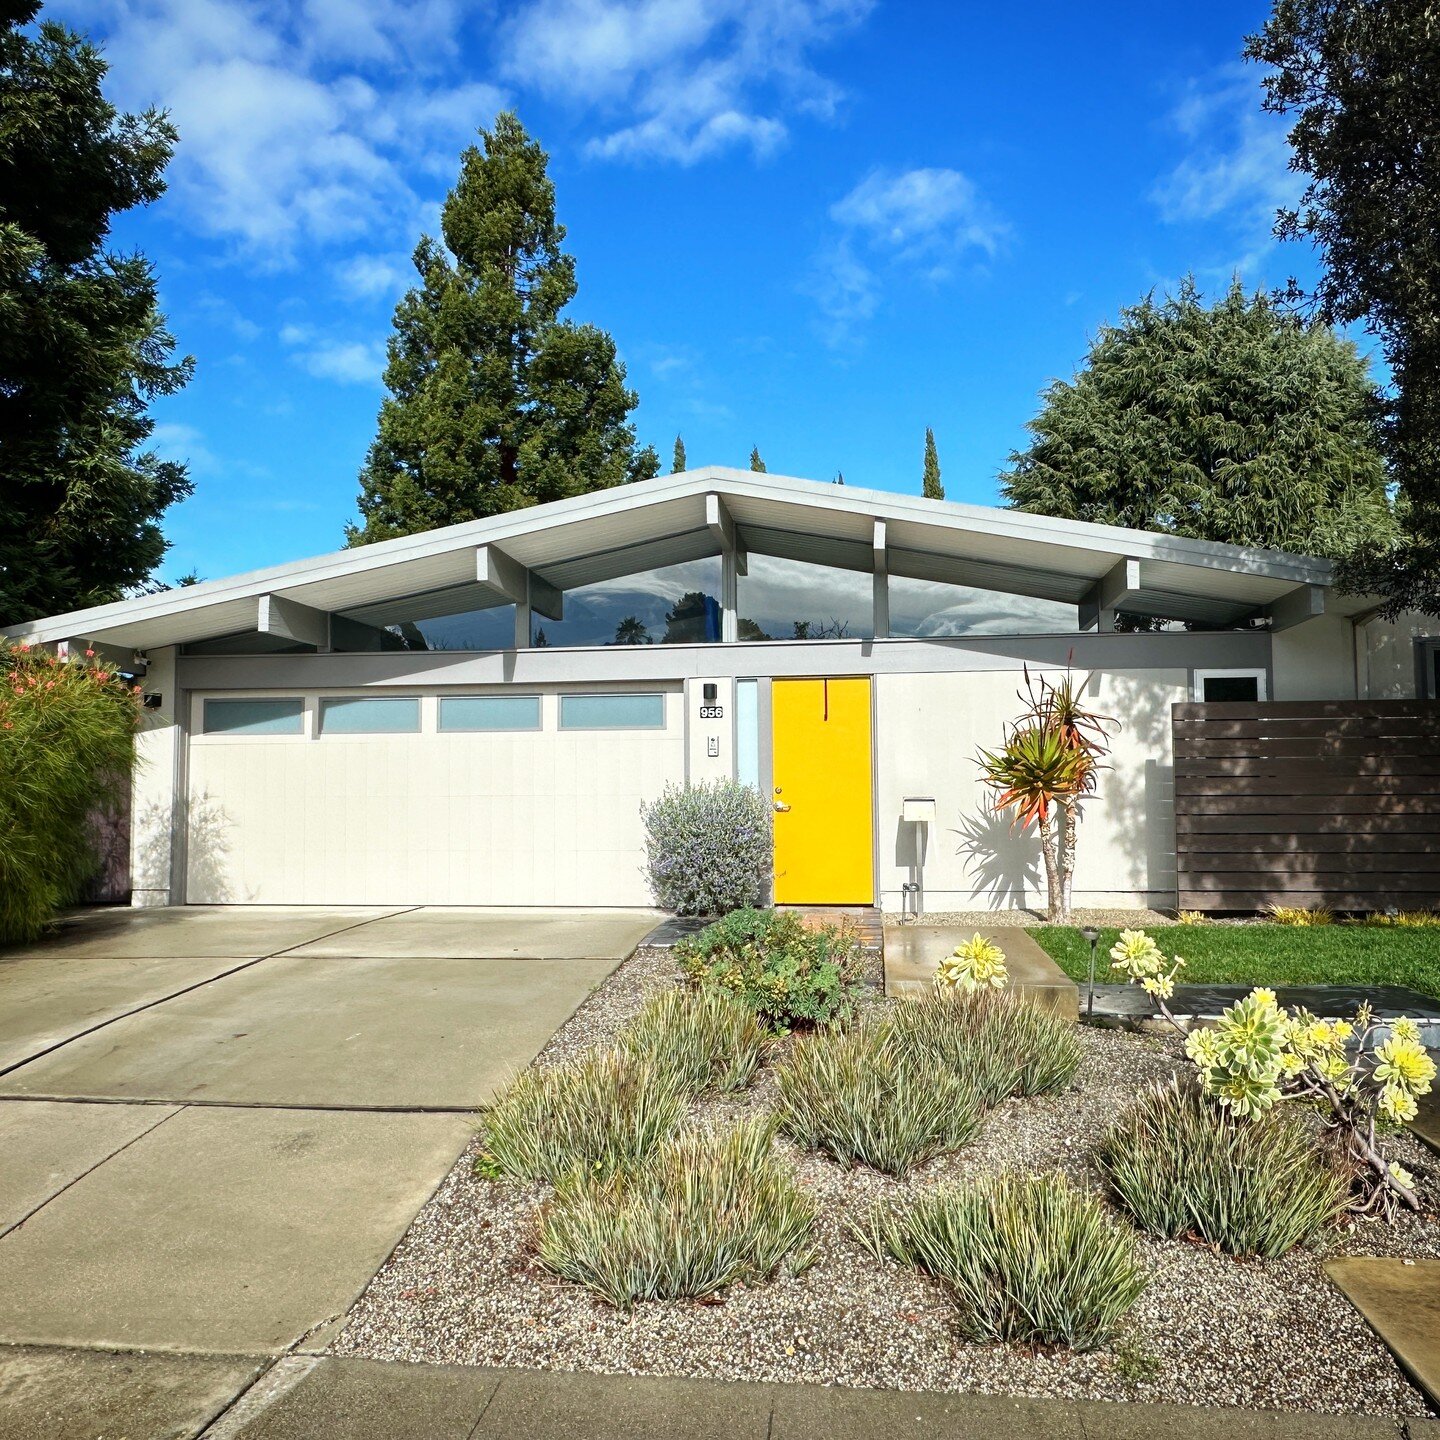 🏡✨ Spotlight on Eichler: Bell Gardens Beauty! 🌟🌳

While exploring the charming Bell Gardens Eichler neighborhood in Mountain View, I stumbled upon this stunning low gable Eichler home! 🚗👀 A true mid-century modern gem, this architectural masterp